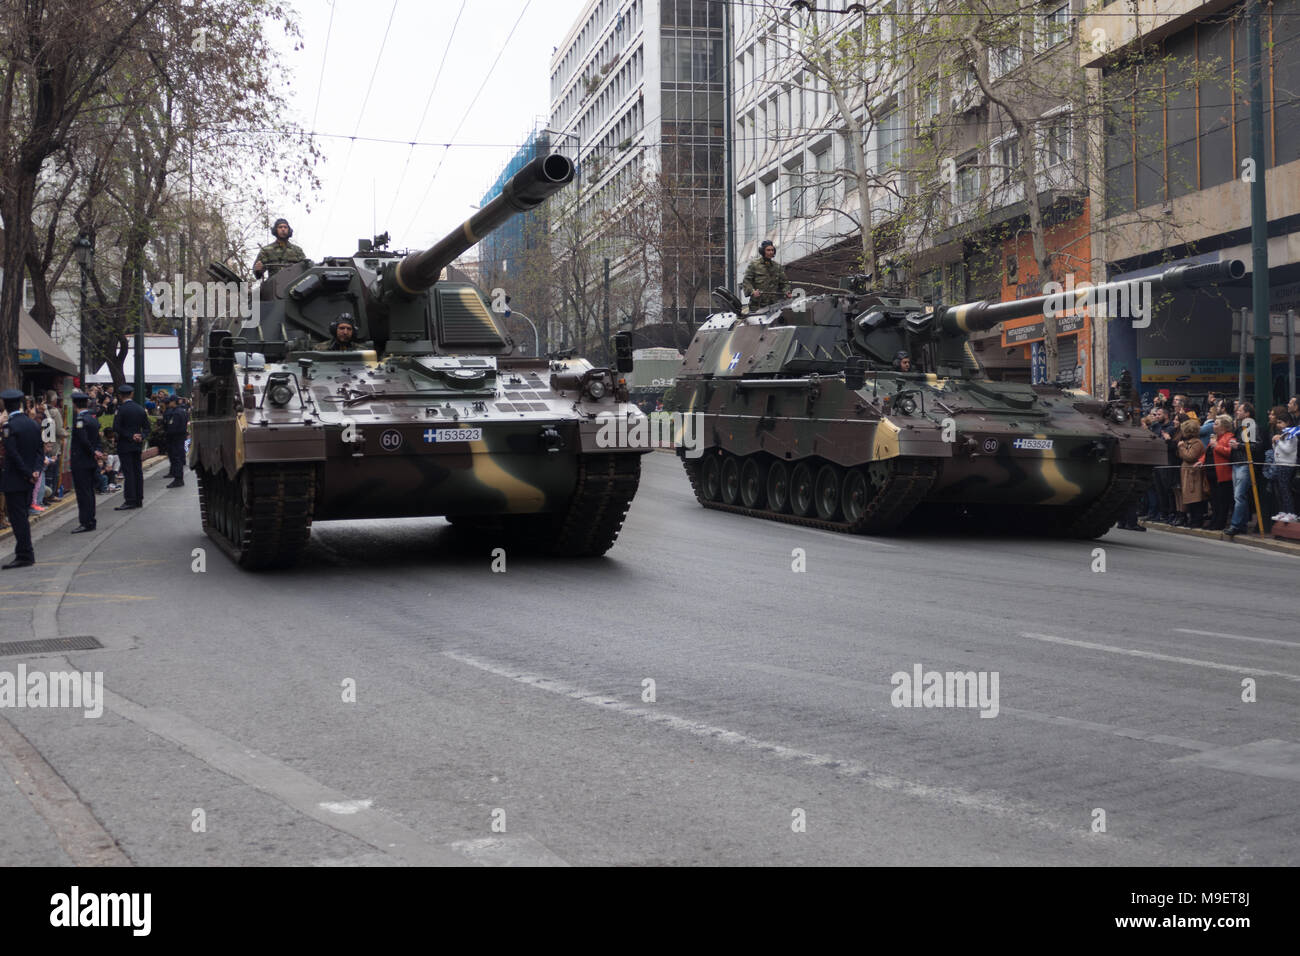 Athens, Greece. 25th March 2018. Parade of military and other on the occasion of the celebration of the Greek Independence day in central Athens. Credit: Rainboweyes/Alamy Live News Stock Photo